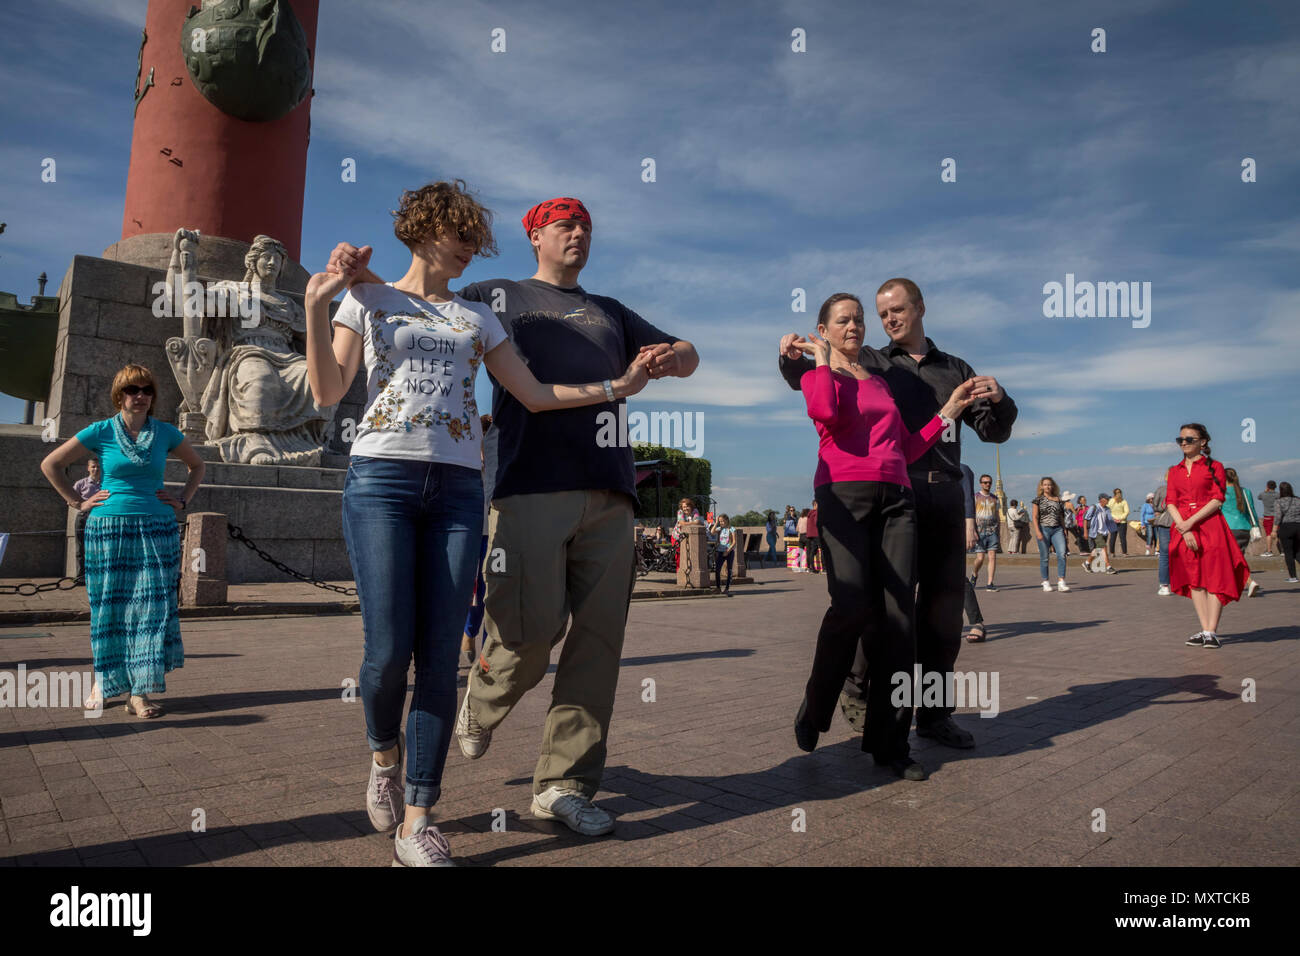 Local residents learn to dance on Birzhevaya Ploschad (Exchange Square) in the center of Saint Petersburg city, Russia Stock Photo